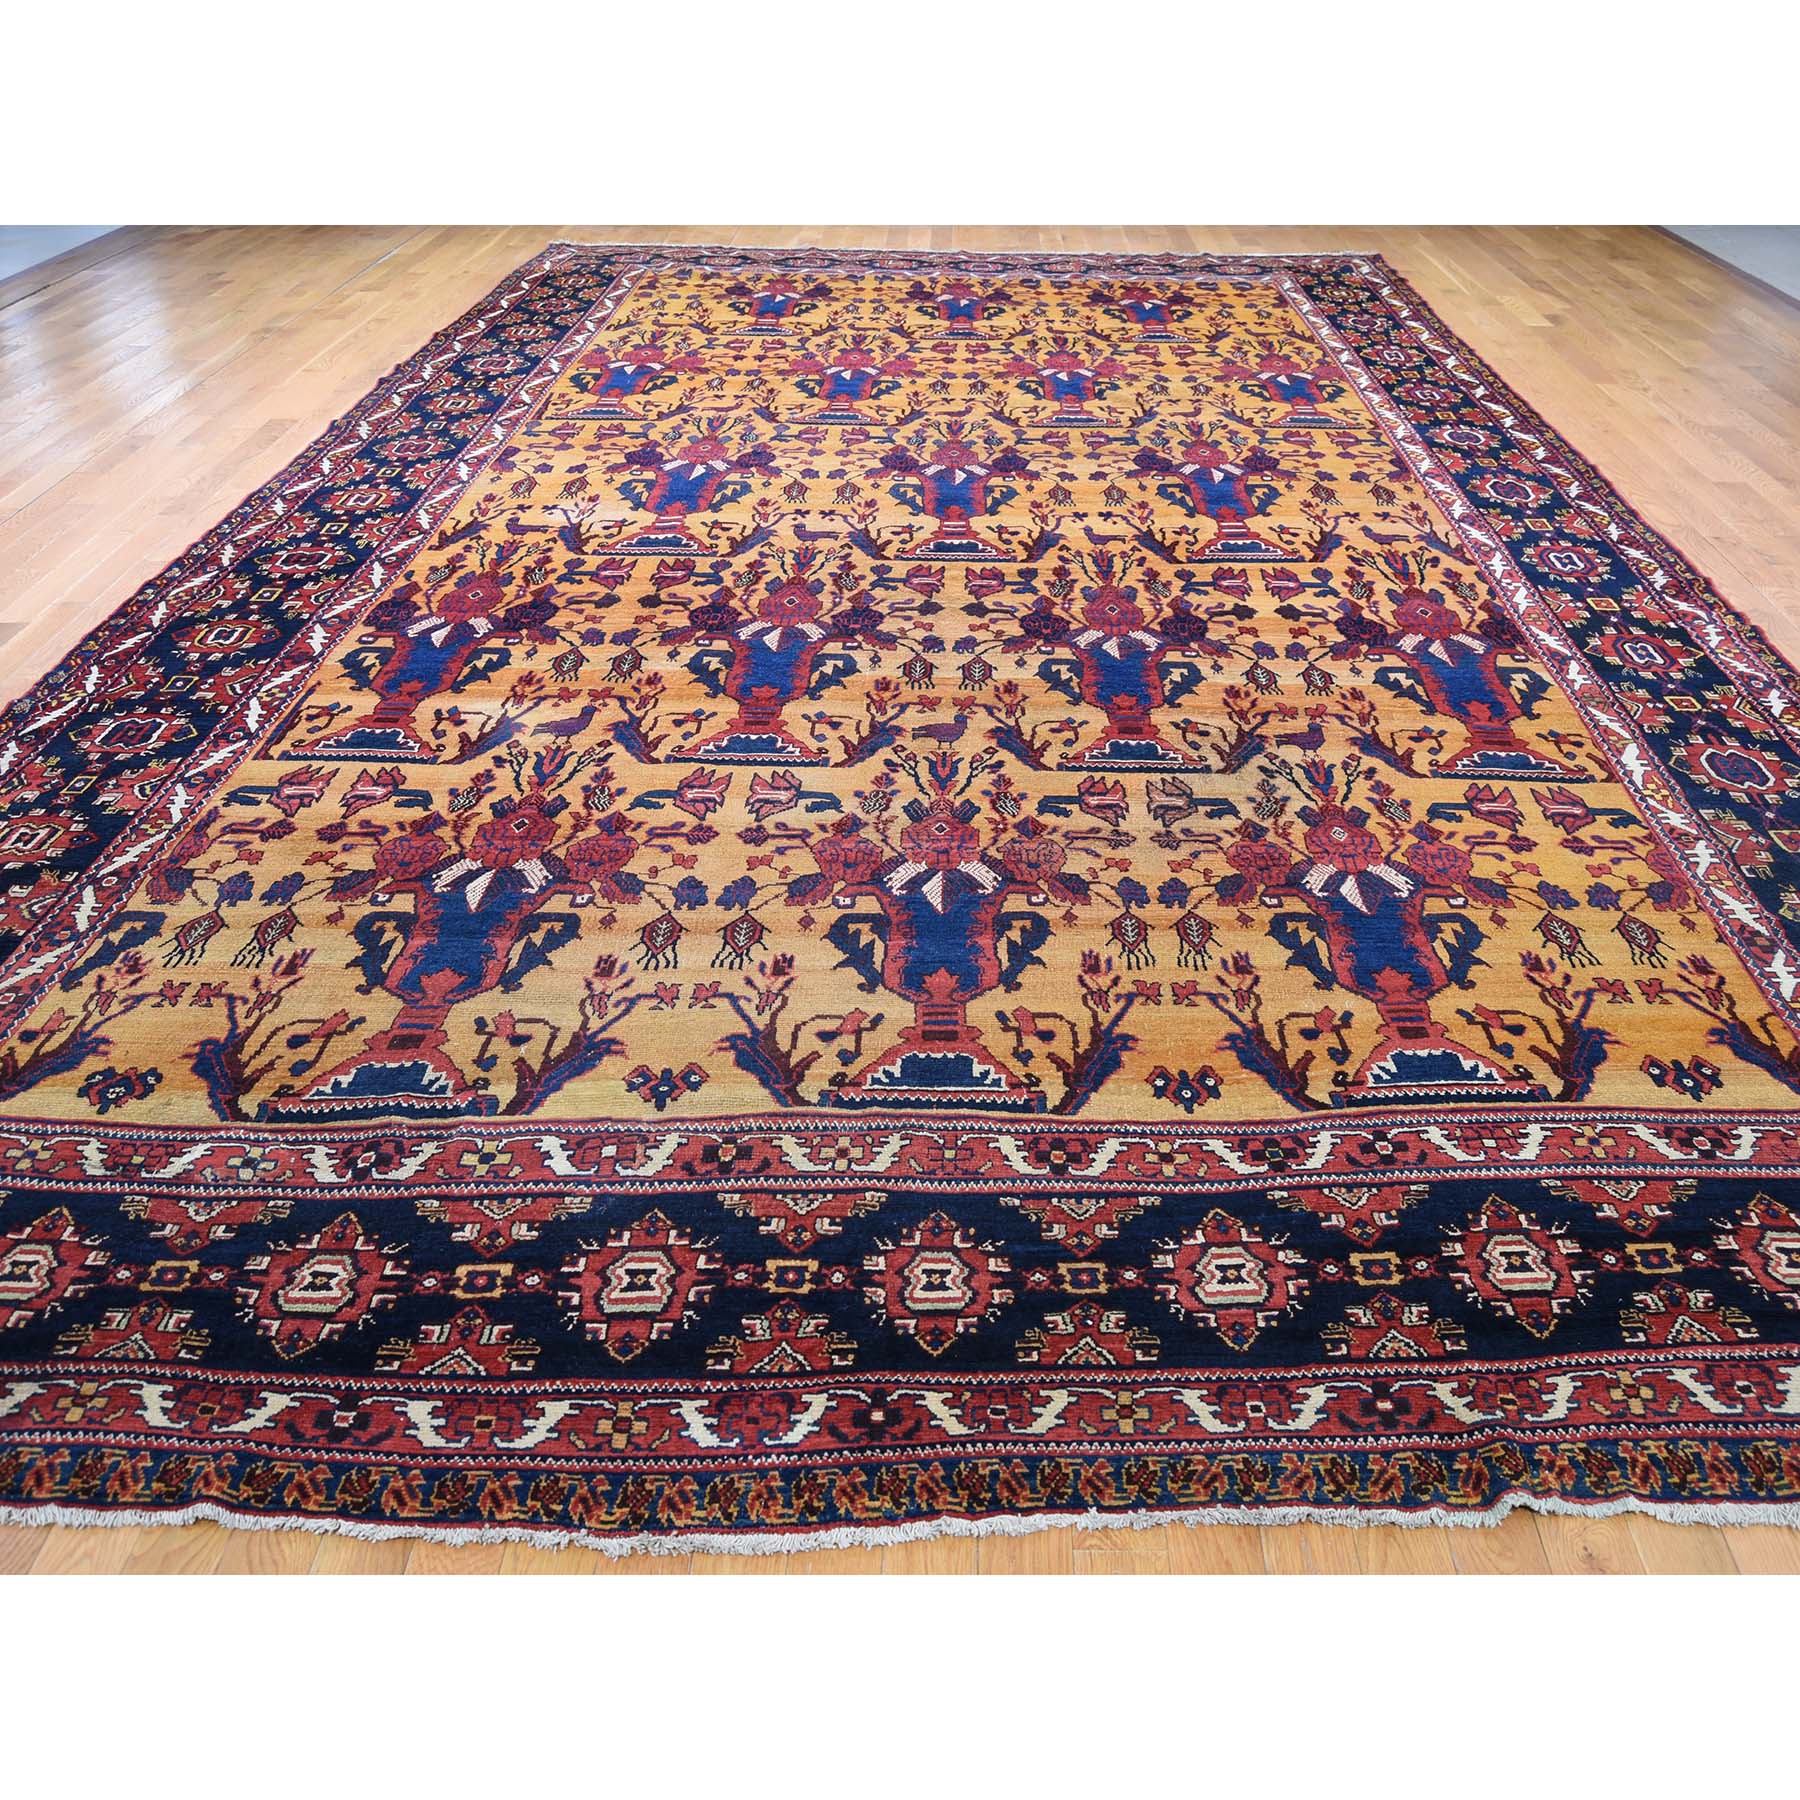 10-4 x17-7  Antique Persian Gallery Size Bakhtiari Pure Wool Hand-Knotted Oriental Rug 